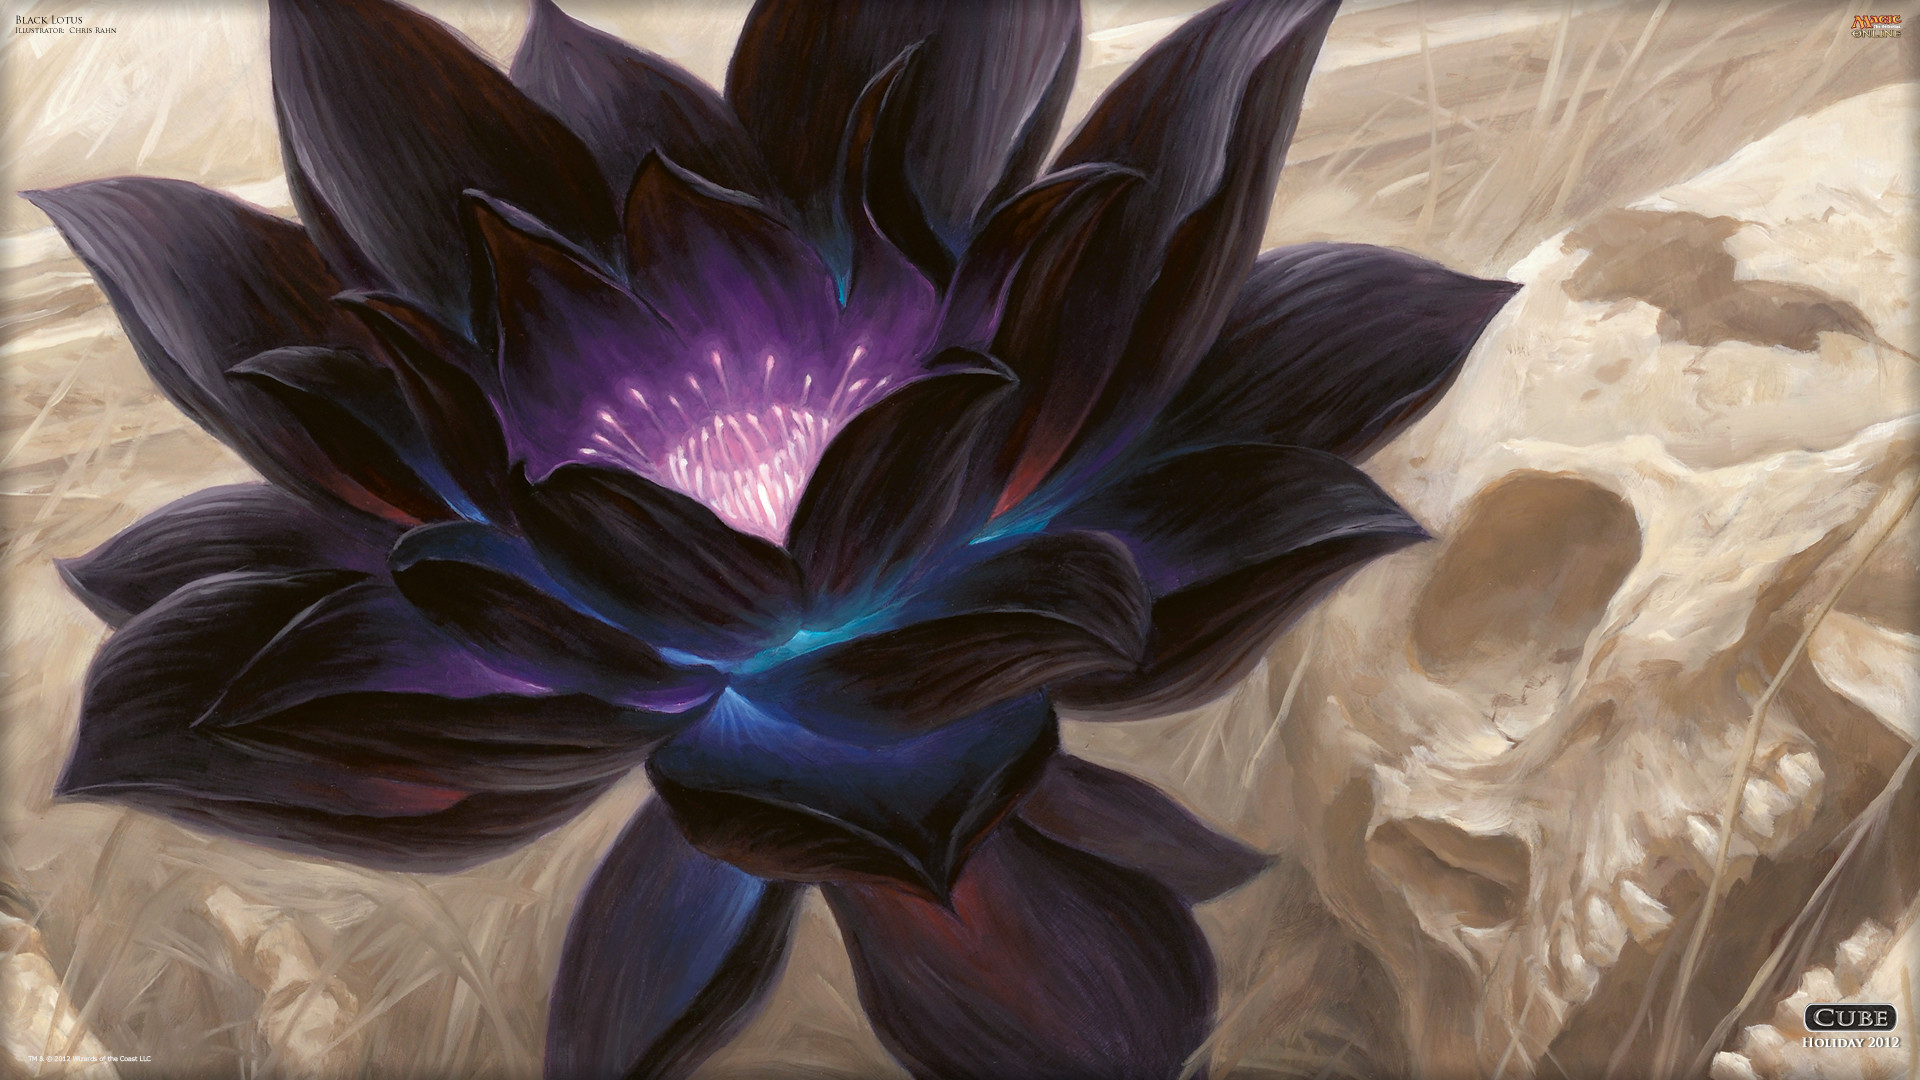 1920x1080 Wallpaper of the Day: Black Lotus